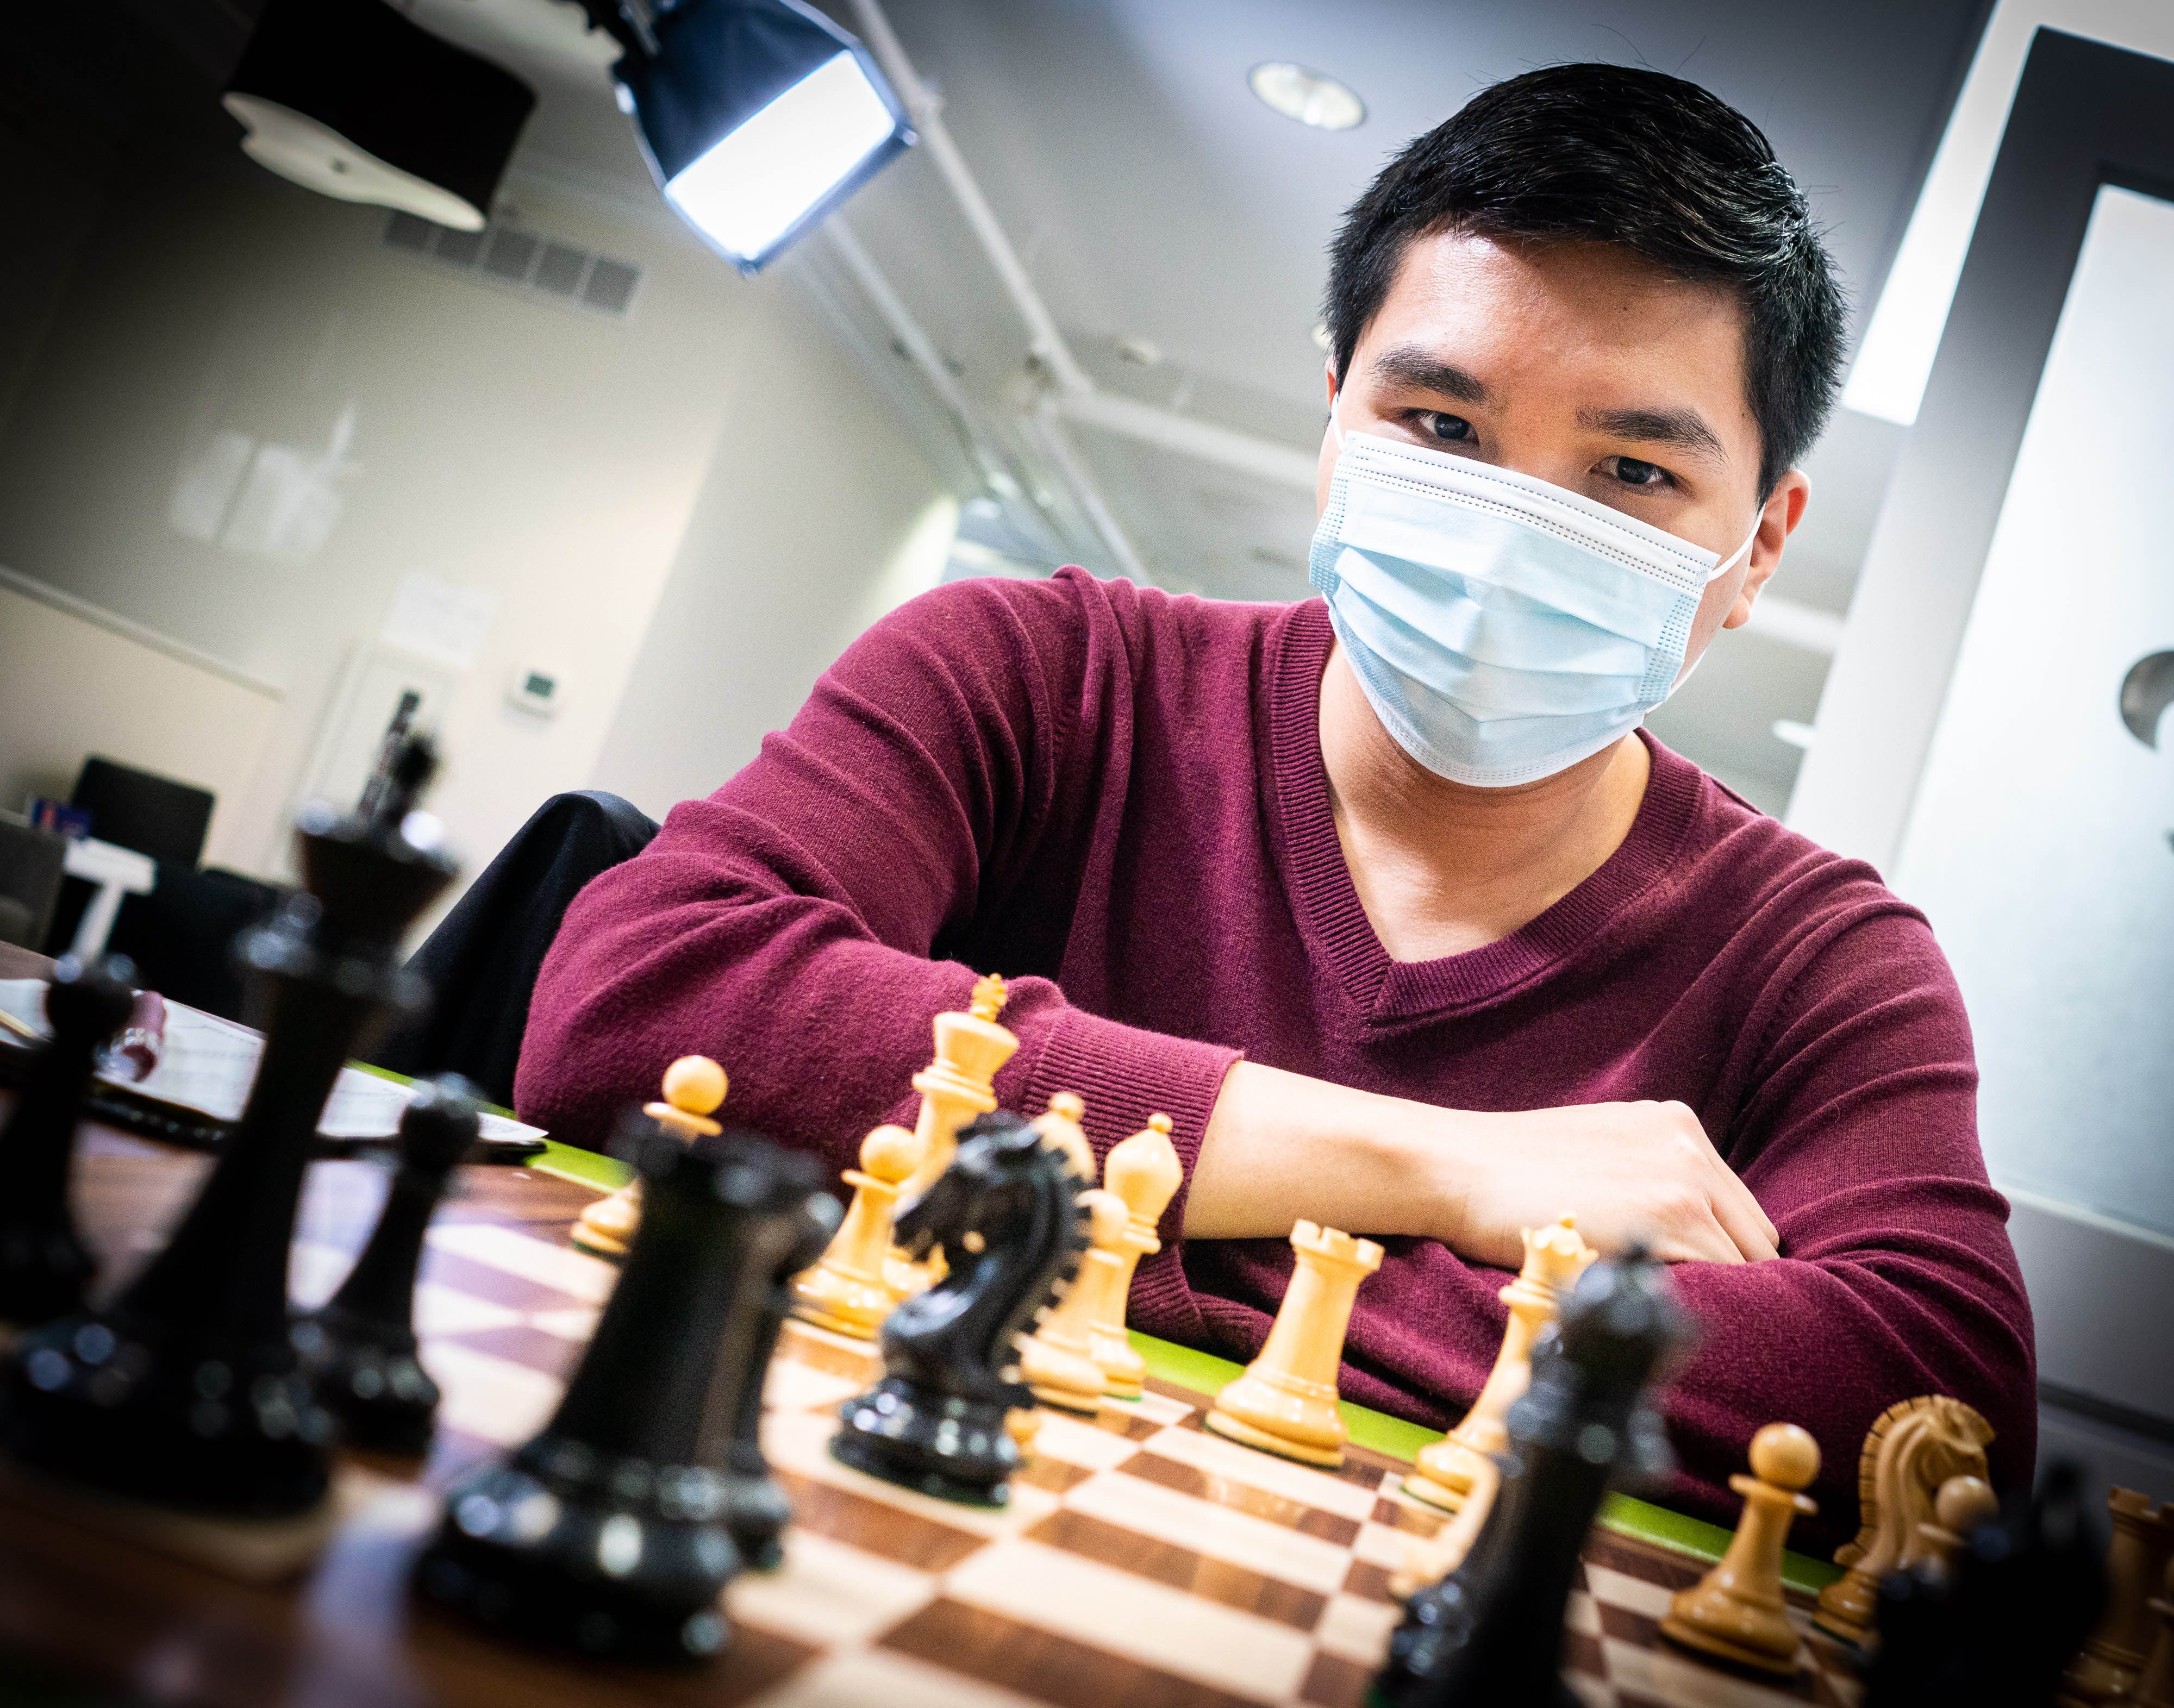 Wesley So vaults to 2nd behind Dominguez at 2021 Champions Showdown ...